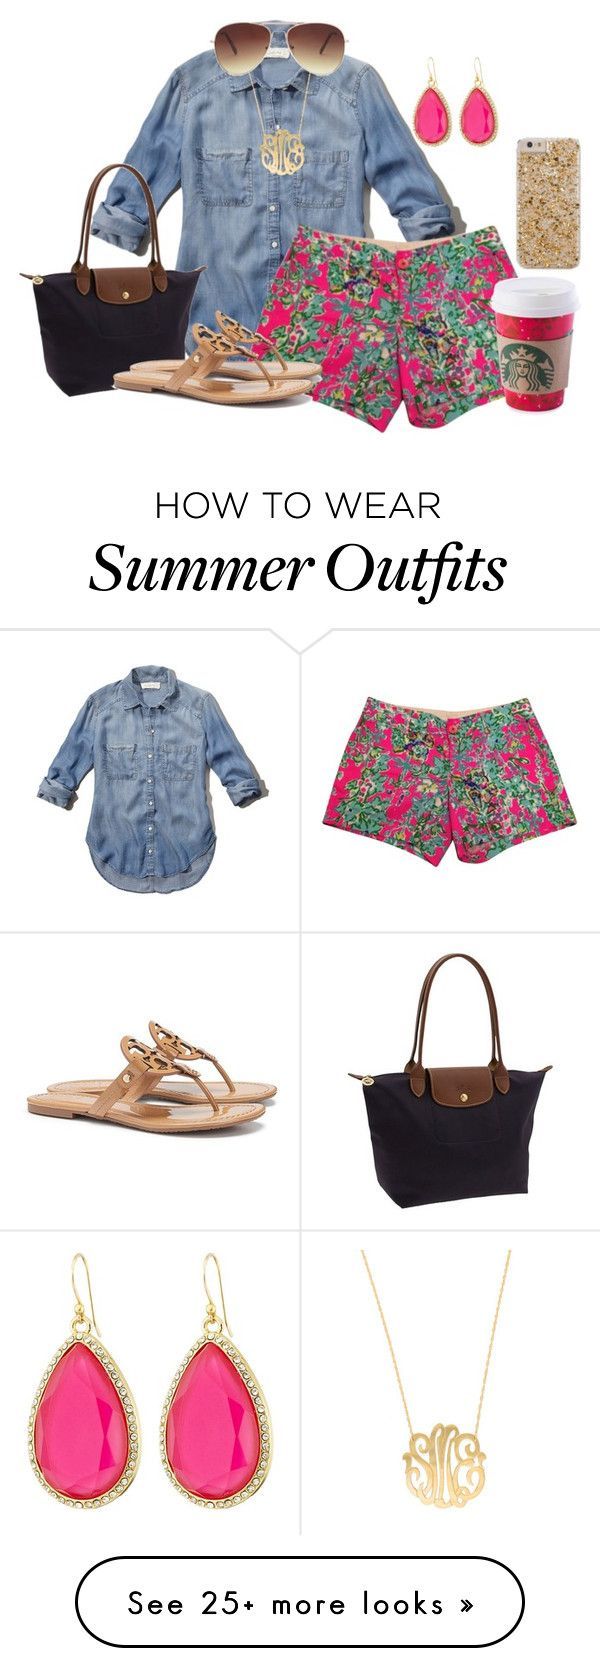 “Summer outfit” by flroasburn on Polyvore featuring Abercrombie & Fitch, Lilly Pulitzer, Longchamp, Tory B